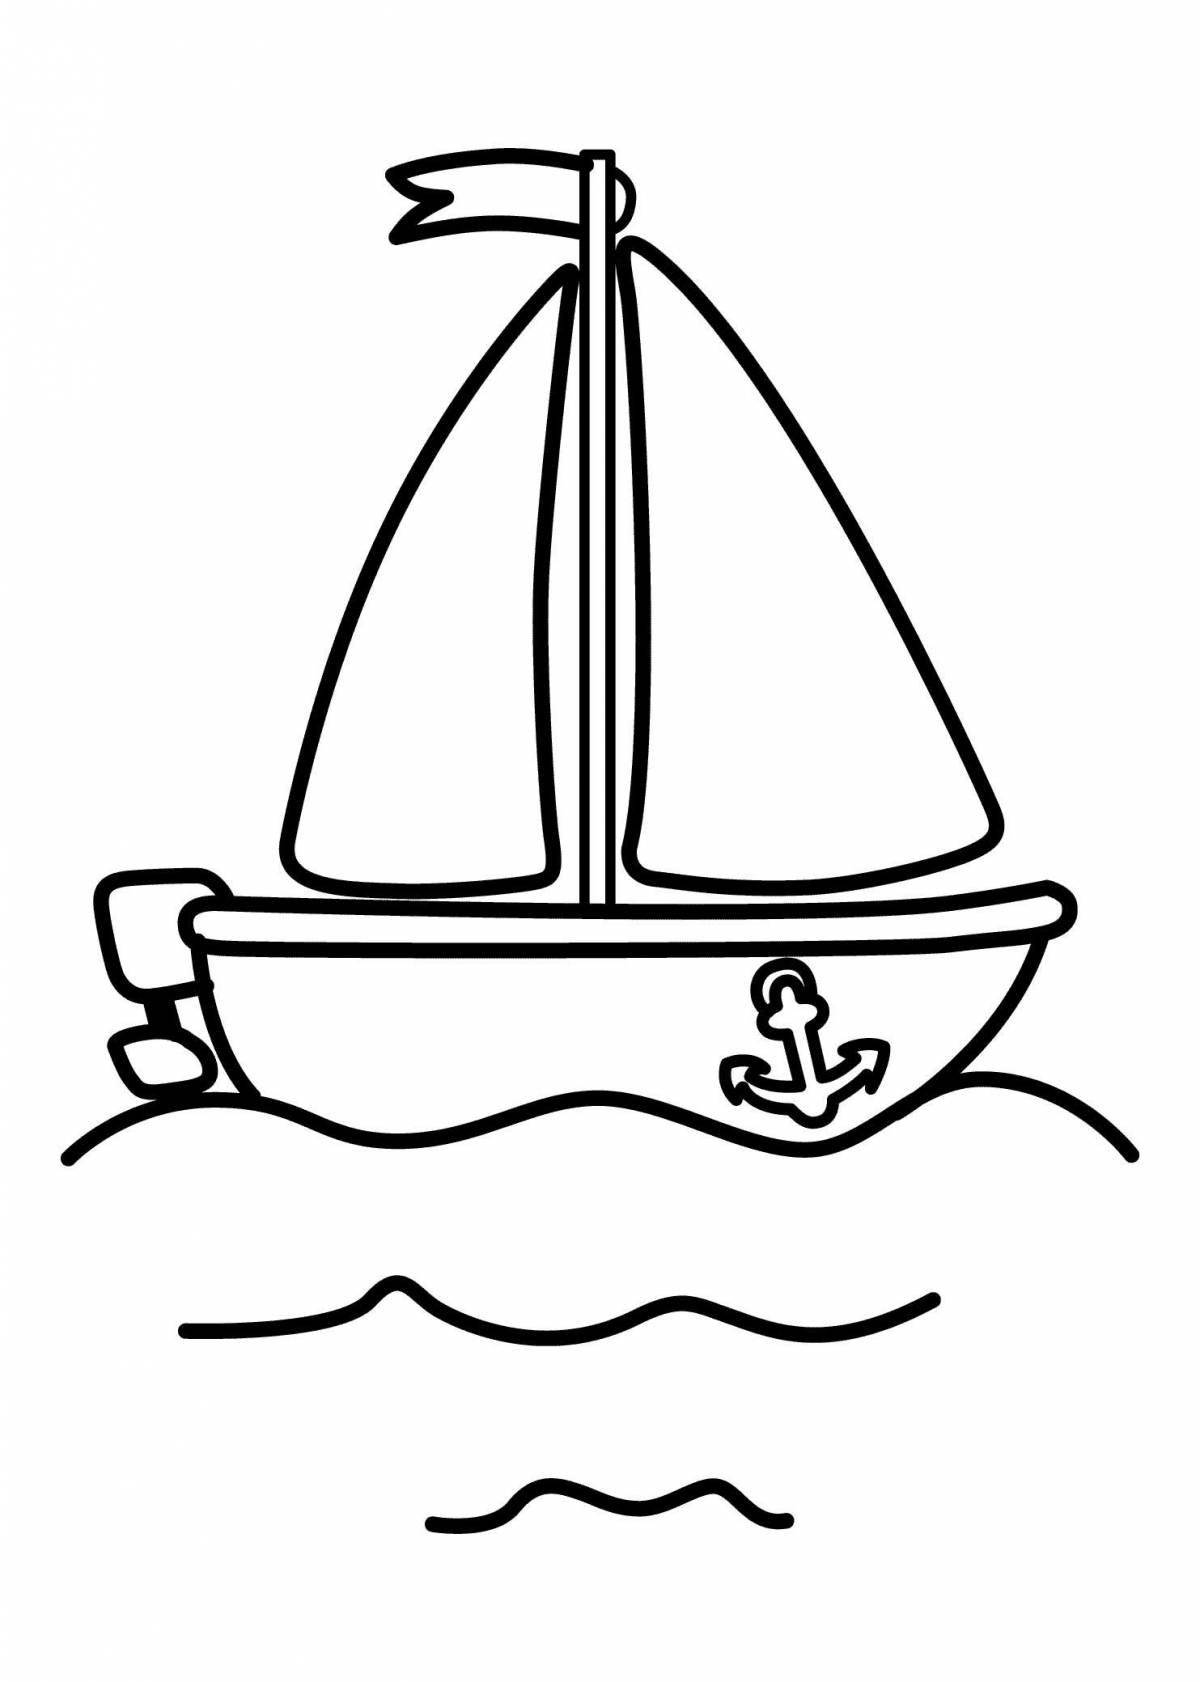 Amusing boat coloring book for 2-3 year olds